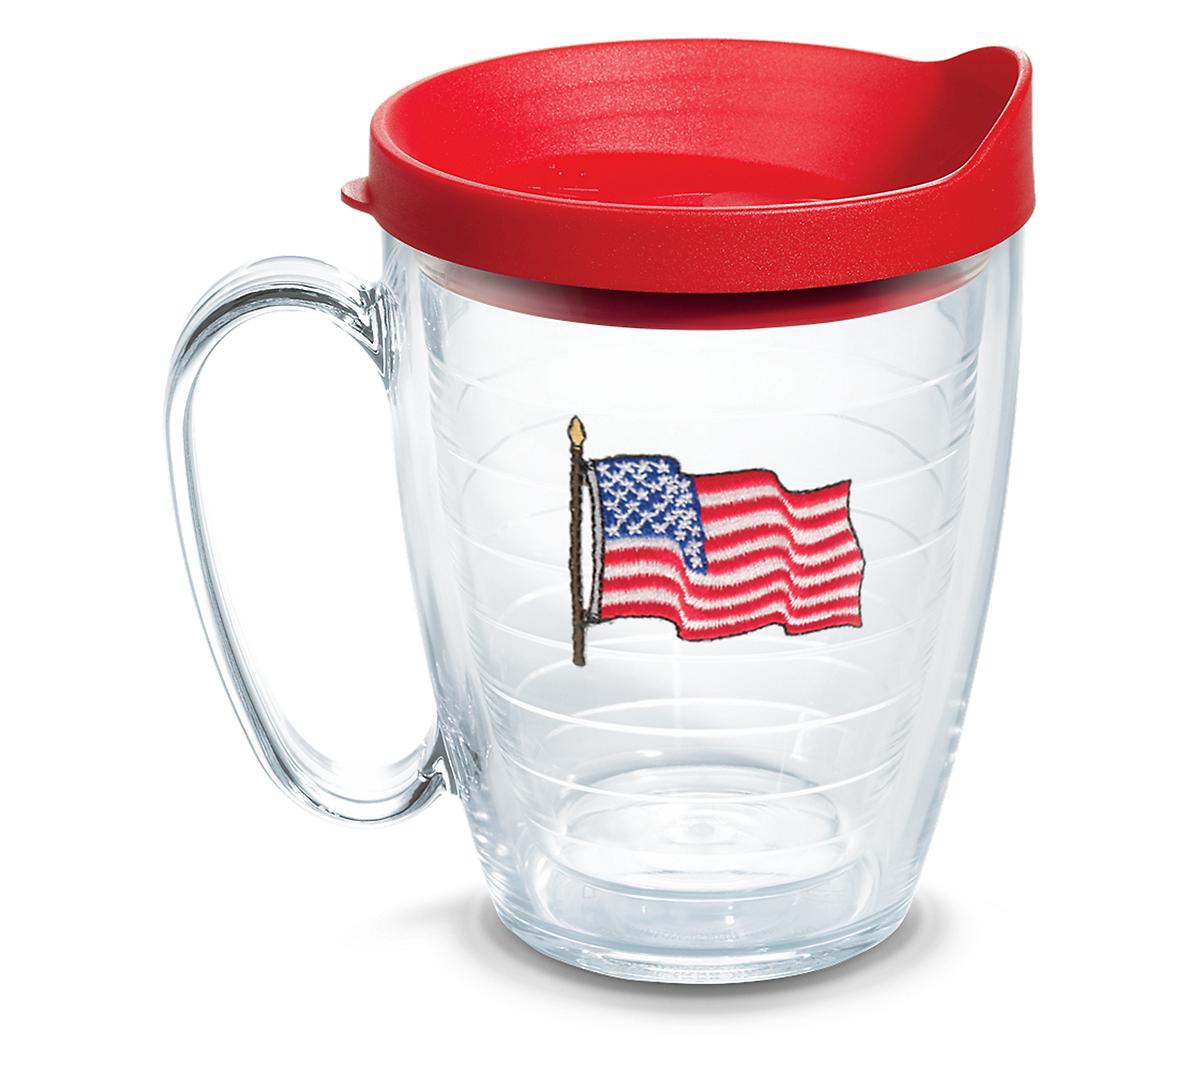 Tervis Tumbler Tervis American Flag Made In Usa Double Walled Insulated Tumbler Travel Cup Keeps Drinks Cold & Hot, In Open Miscellaneous